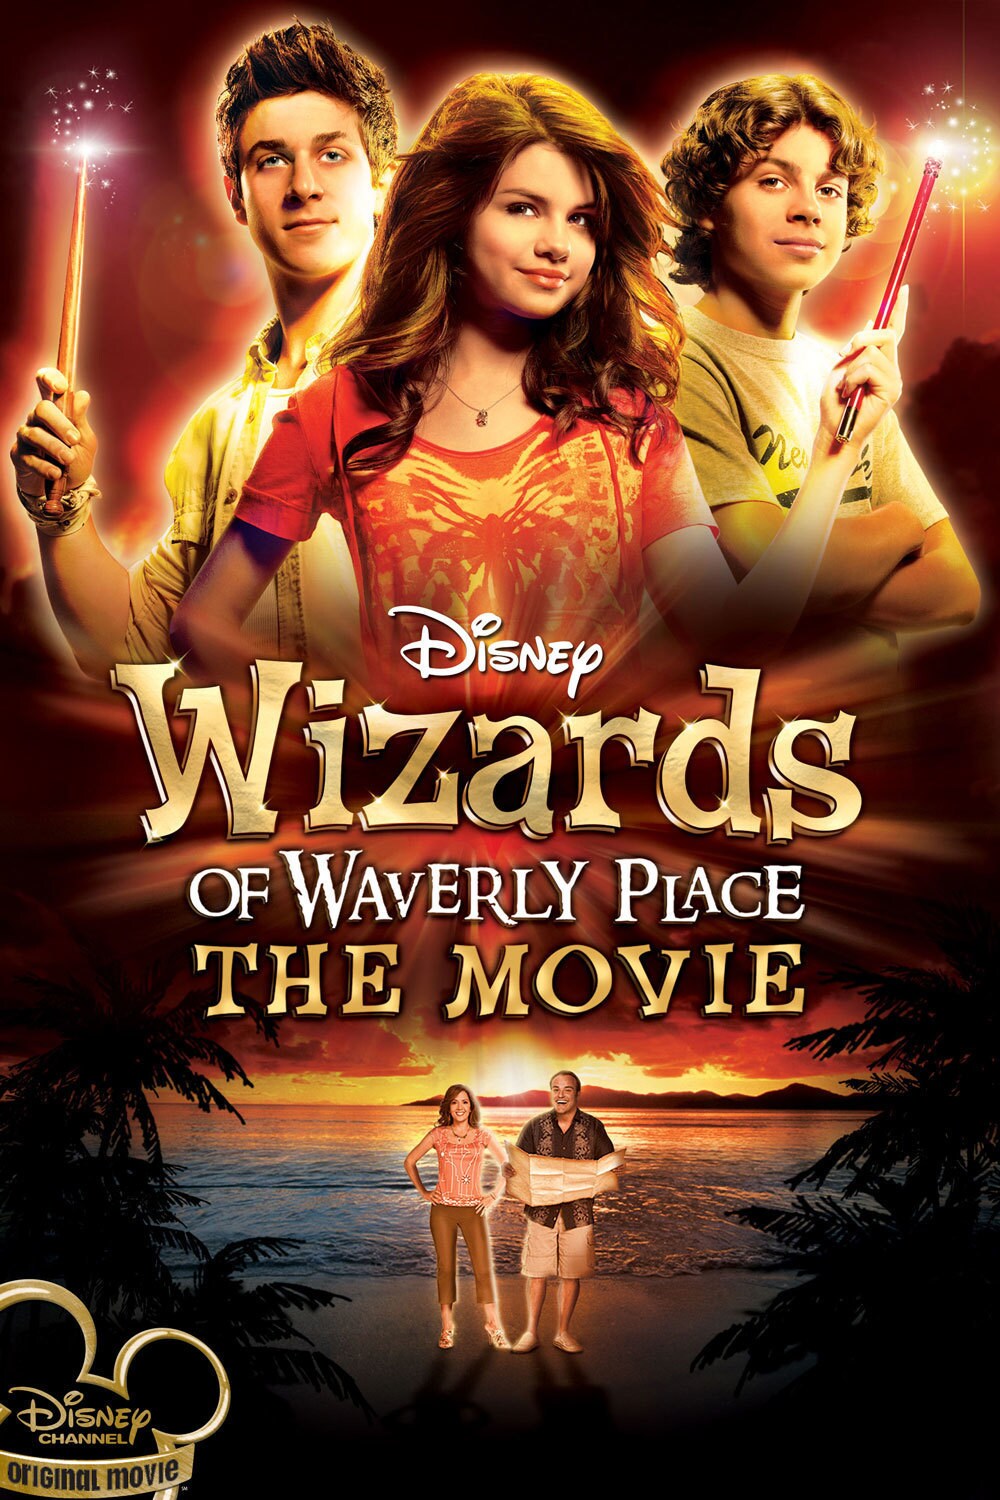 Image result for the wizards of waverly place movie poster